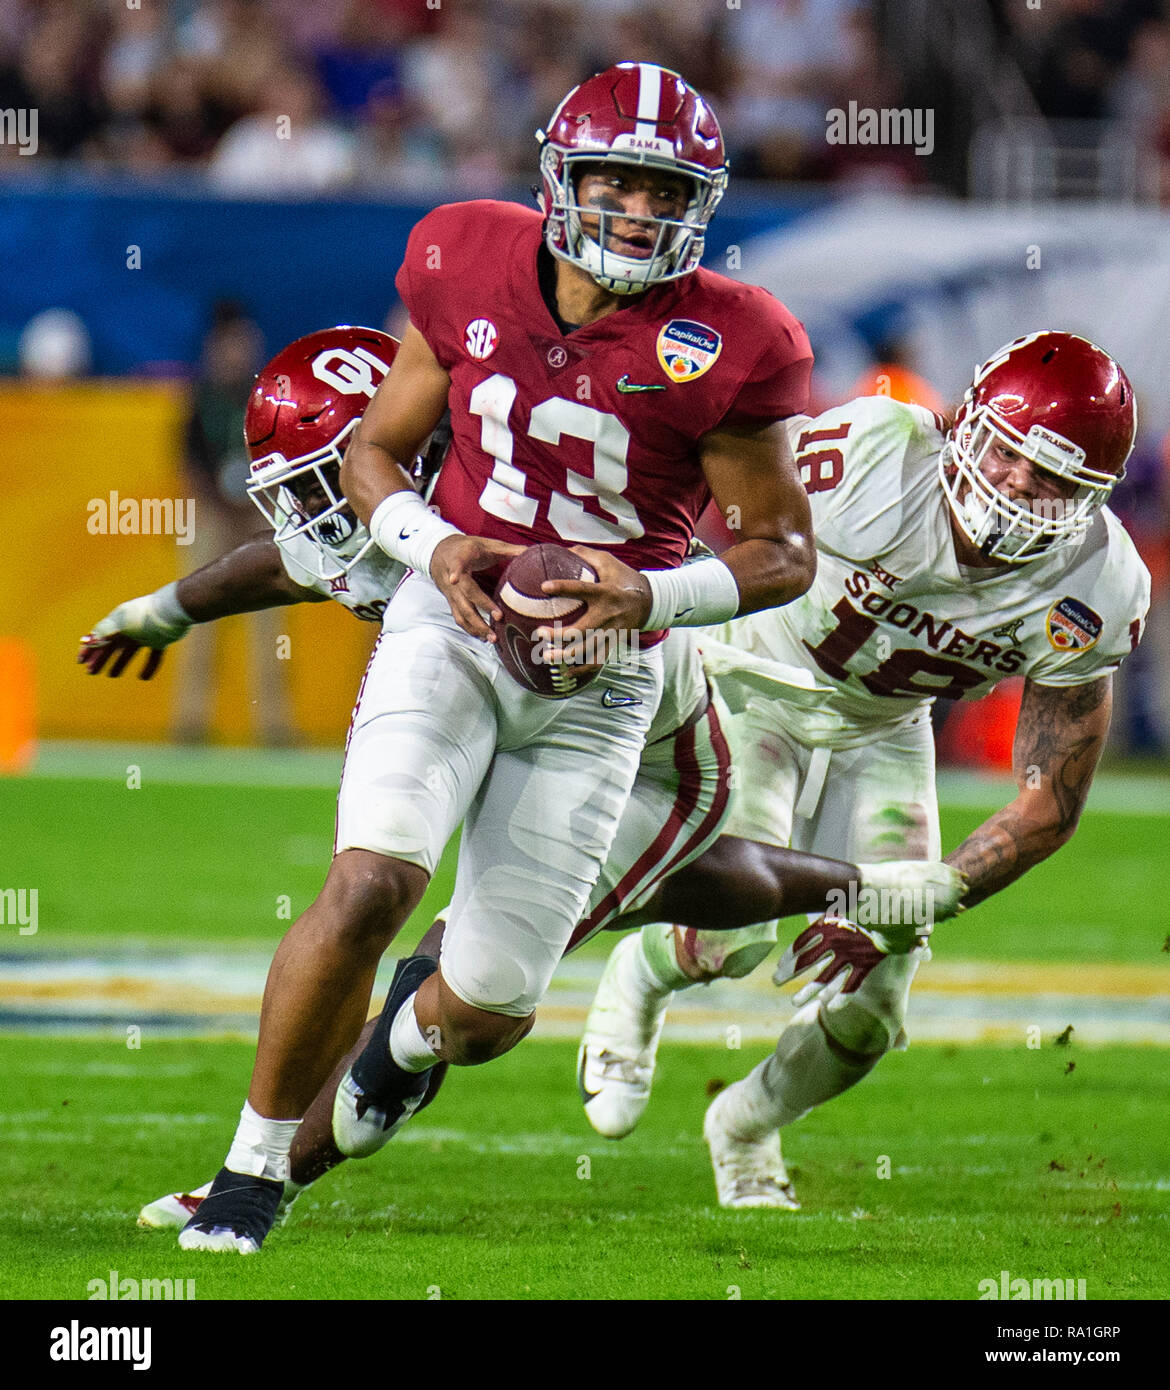 Florida, USA. 29th Dec, 2018. Dec 29 2018 Miami Gardens, FL, U.S.A. Alabama quarterback Tua Tagovailoa (13) game stats 24 for 27 for 318 yards and 4 touchdowns runs in the open field during the NCAA Capital One Orange Bowl Semifinal game between Oklahoma Sooners and the Alabama Crimson Tide 45-34 win at Hard Rock Stadium Miami Gardens, FL Thurman James/CSM Credit: Cal Sport Media/Alamy Live News Stock Photo